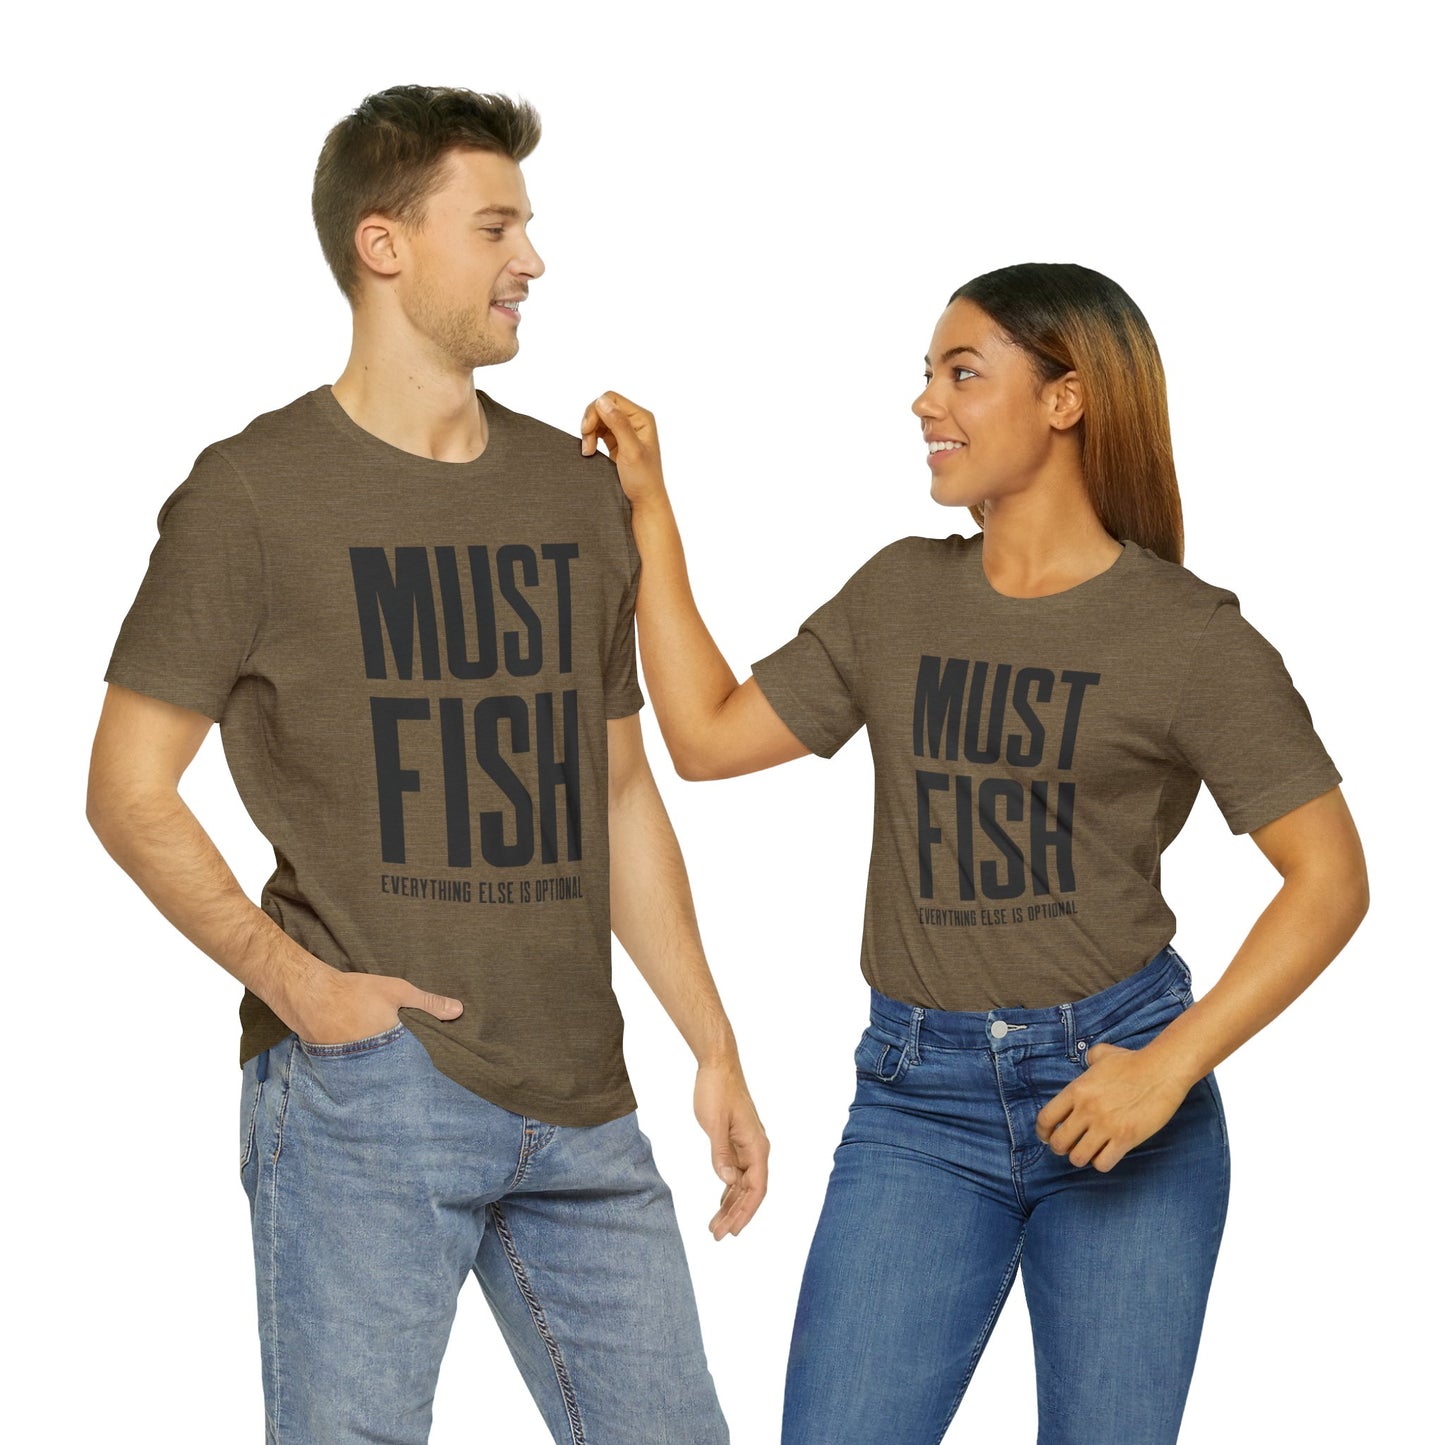 Must Fish (everything else is optional) T Shirt